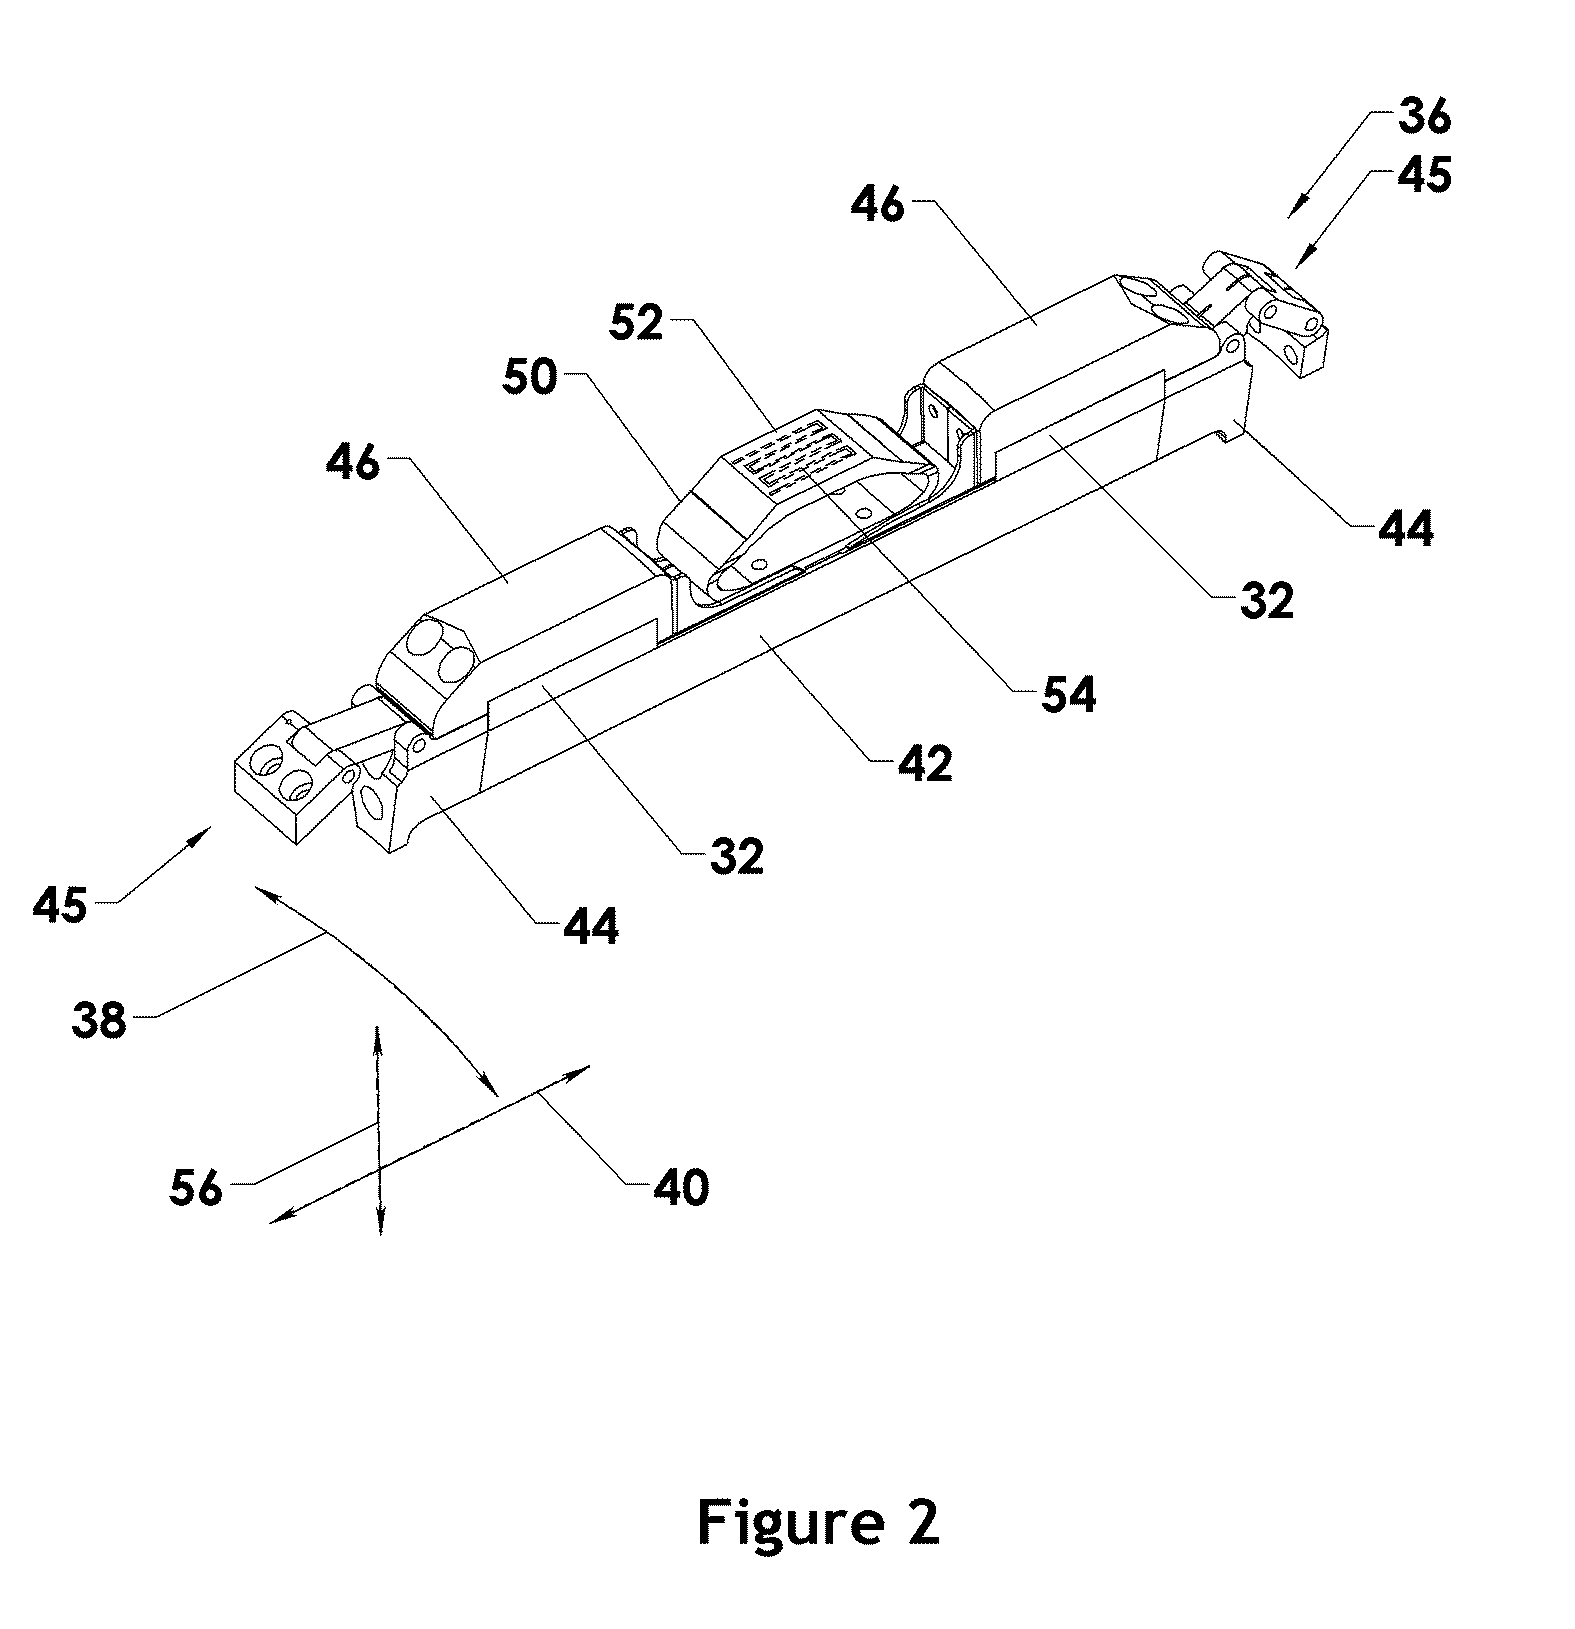 Pseudorandom binary sequence apparatus and method for in-line inspection tool